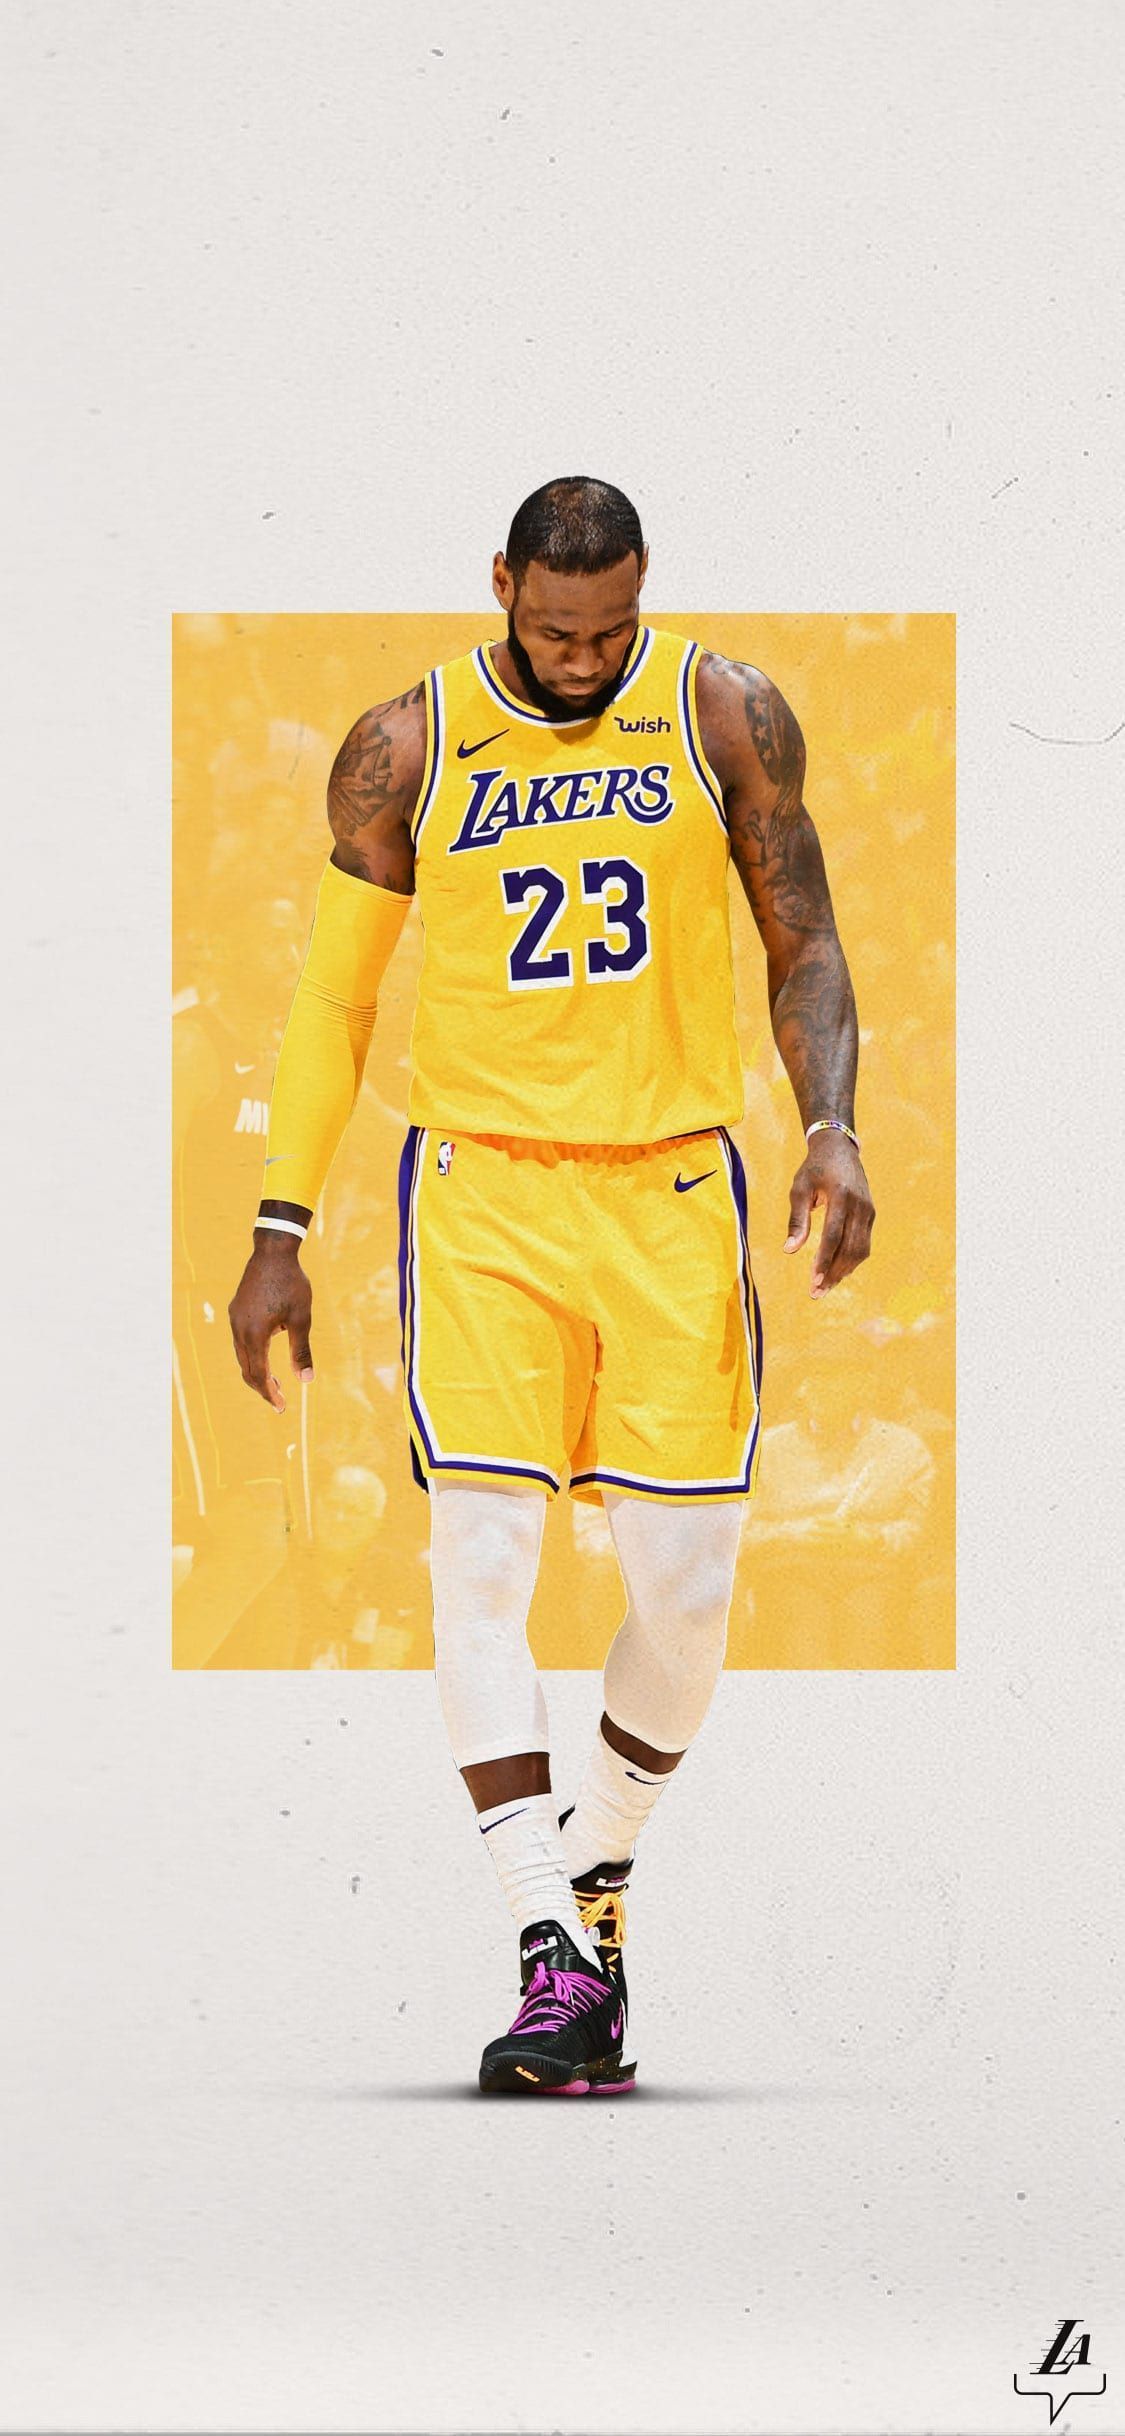 Lebron James Lakers iPhone Wallpaper with high-resolution 1080x1920 pixel. You can use this wallpaper for your iPhone 5, 6, 7, 8, X, XS, XR backgrounds, Mobile Screensaver, or iPad Lock Screen - Los Angeles Lakers, Lebron James